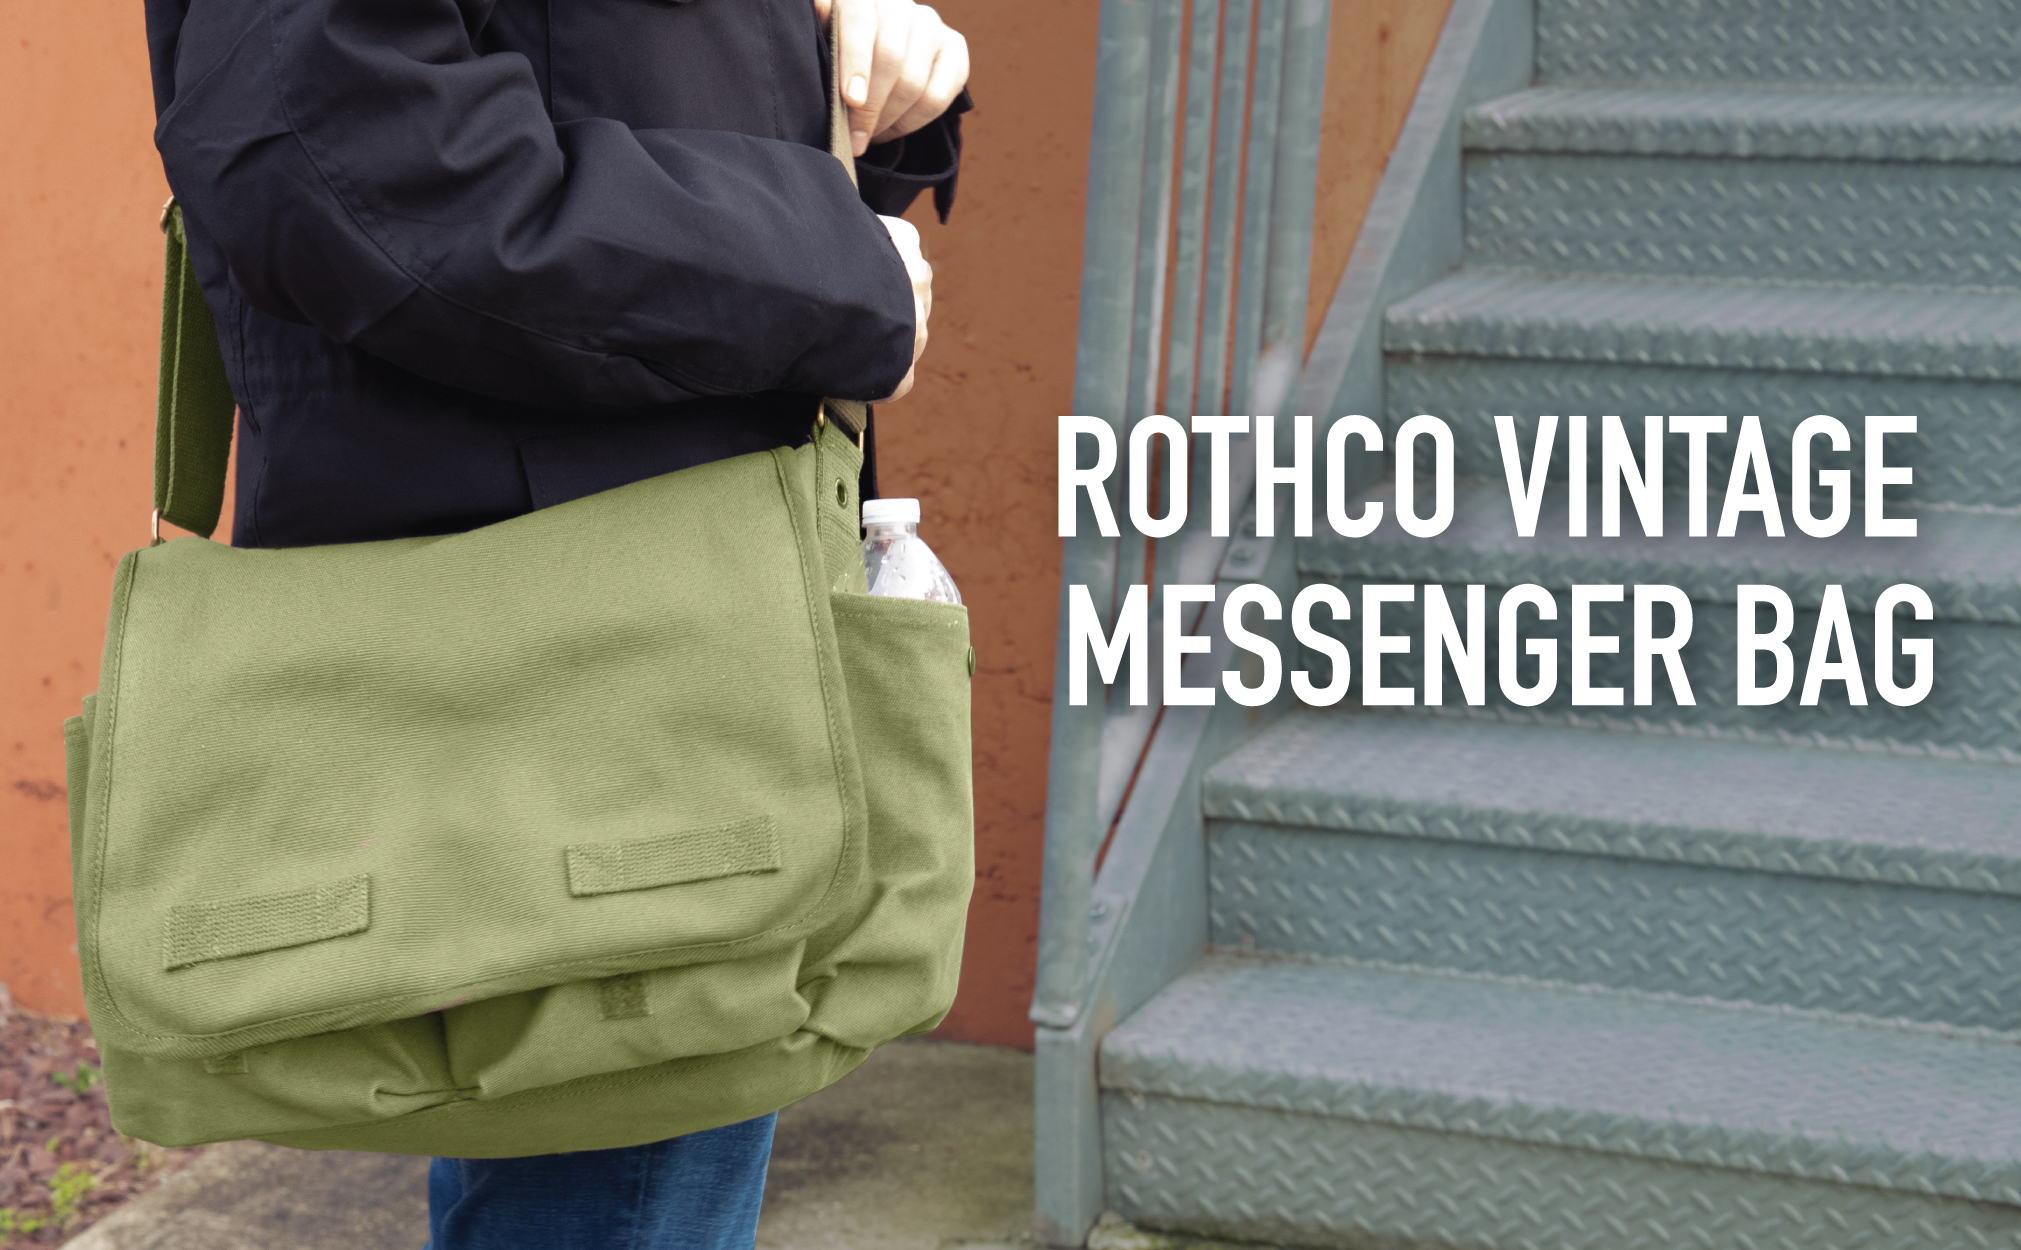 Rothco Classic Canvas Messenger Bag, Coyote Brown - image 3 of 3